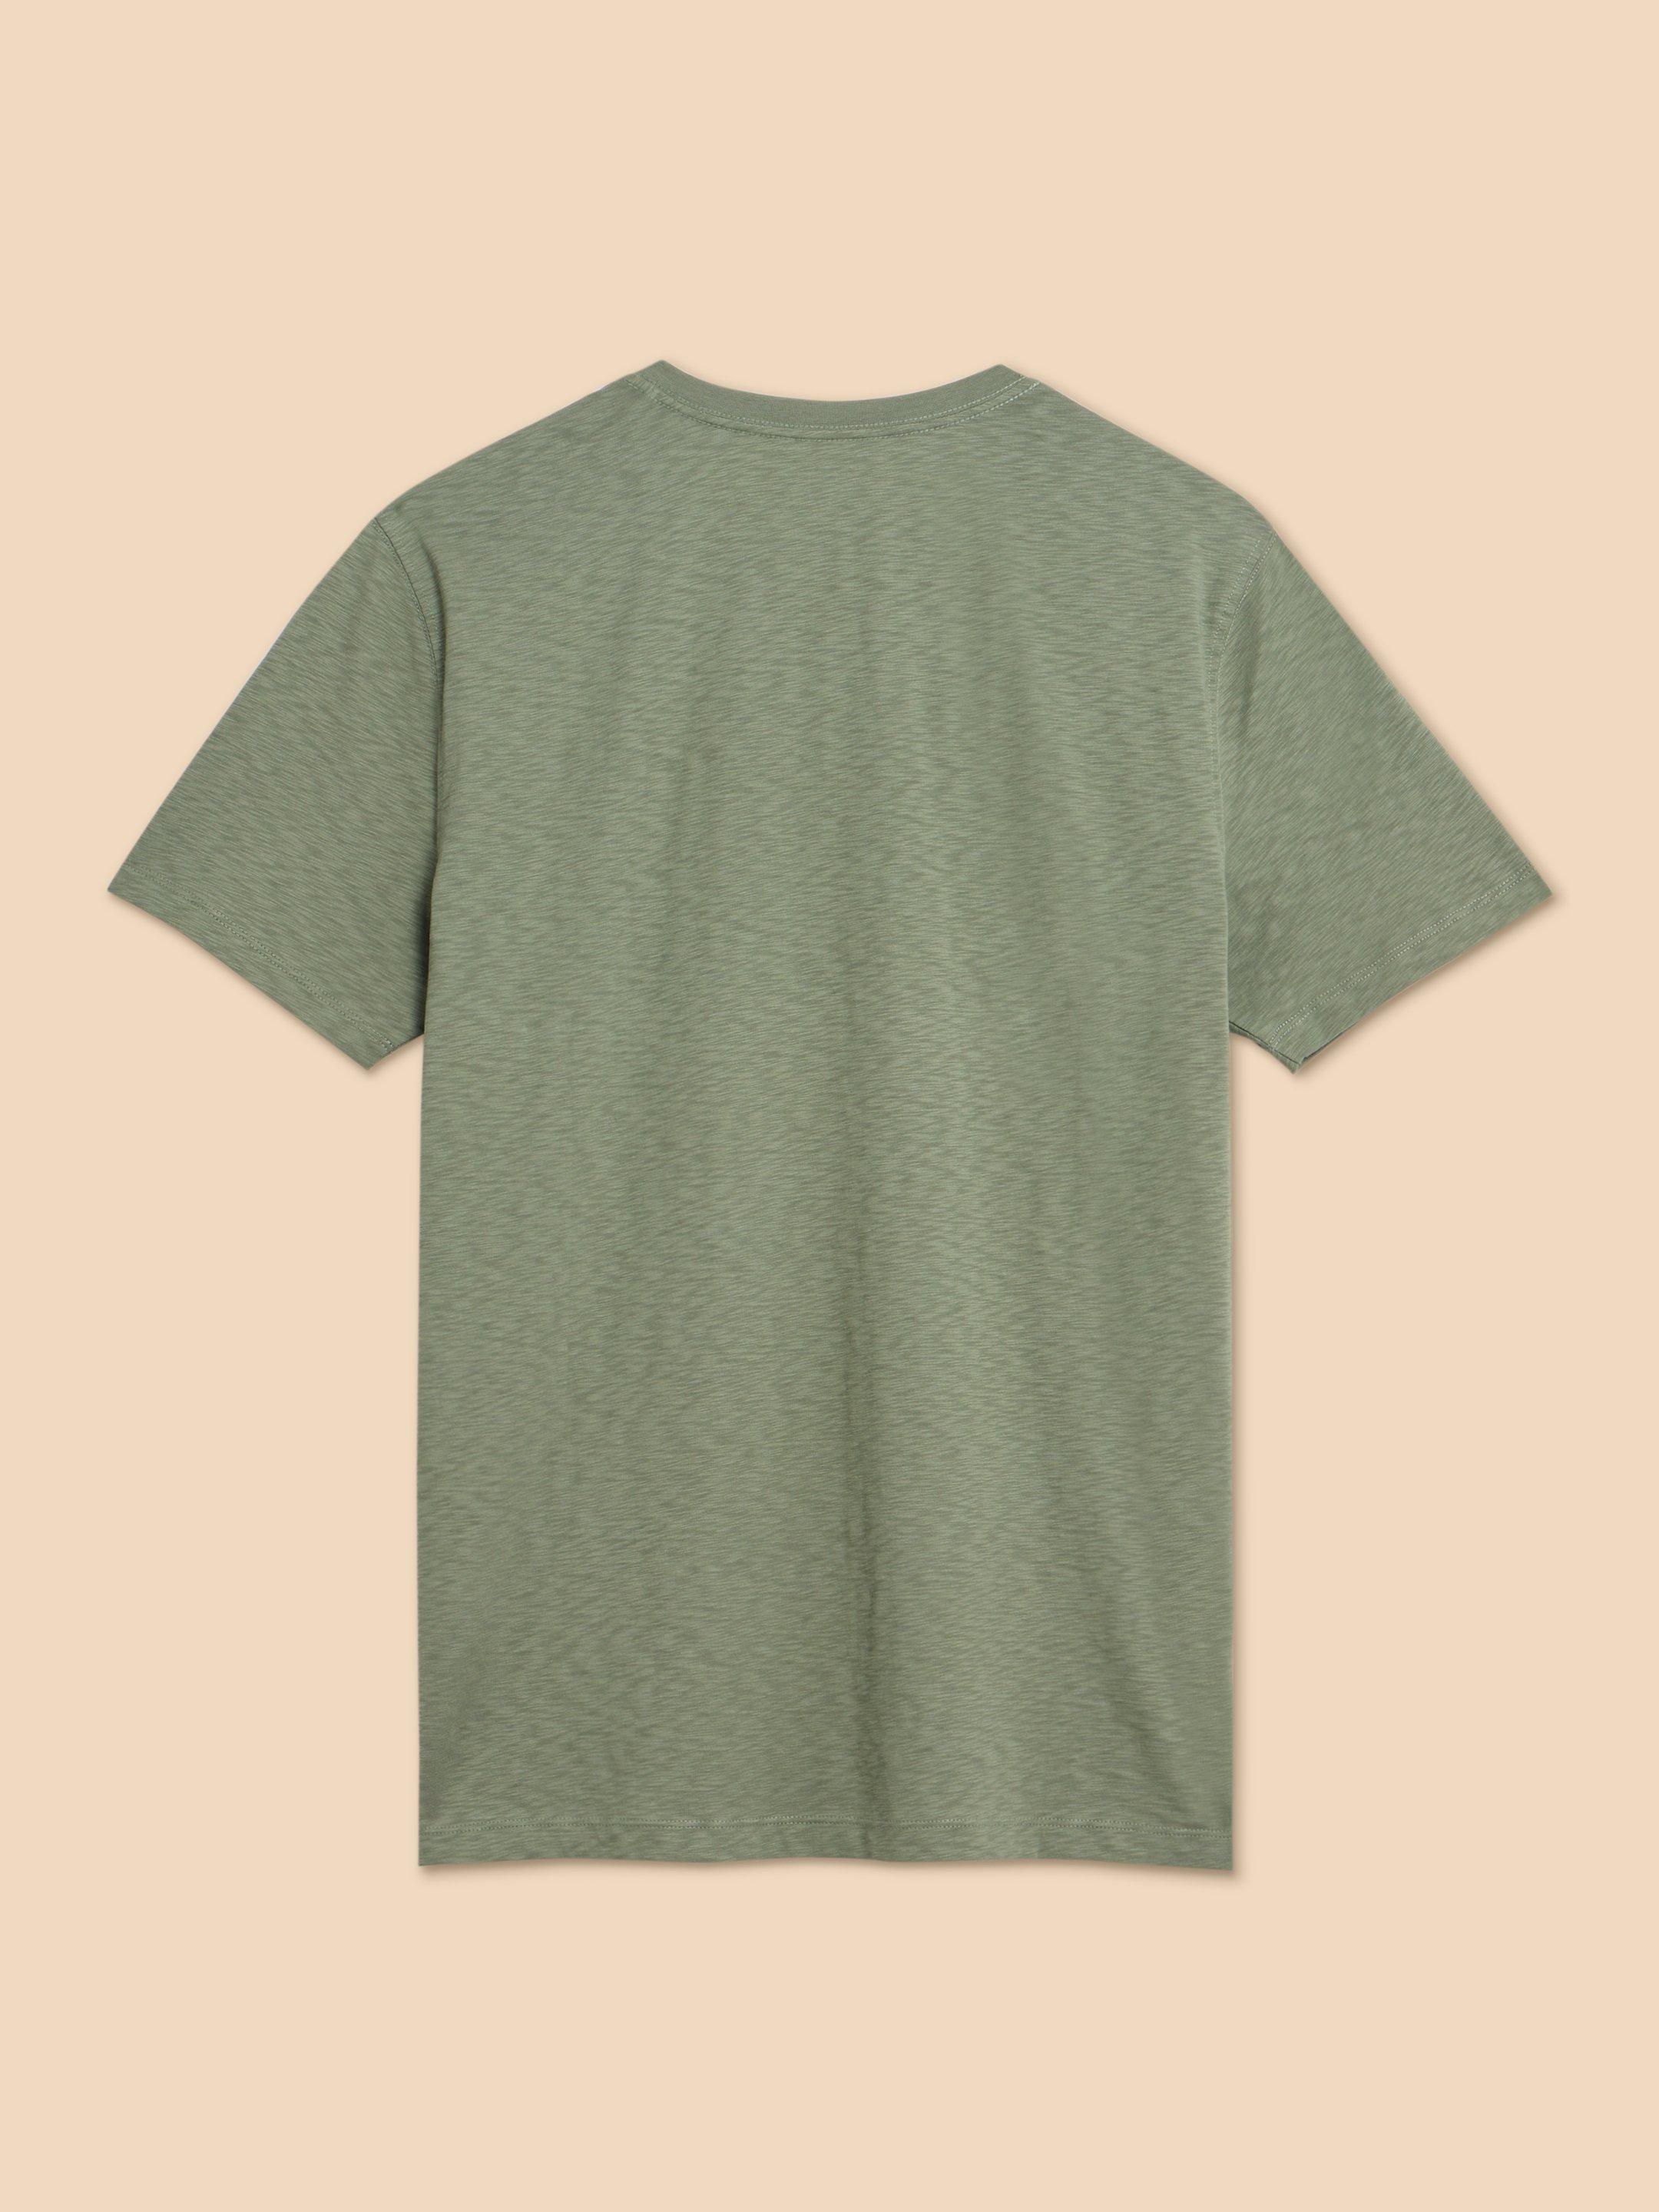 Ride Graphic Tee in GREEN PR - FLAT BACK